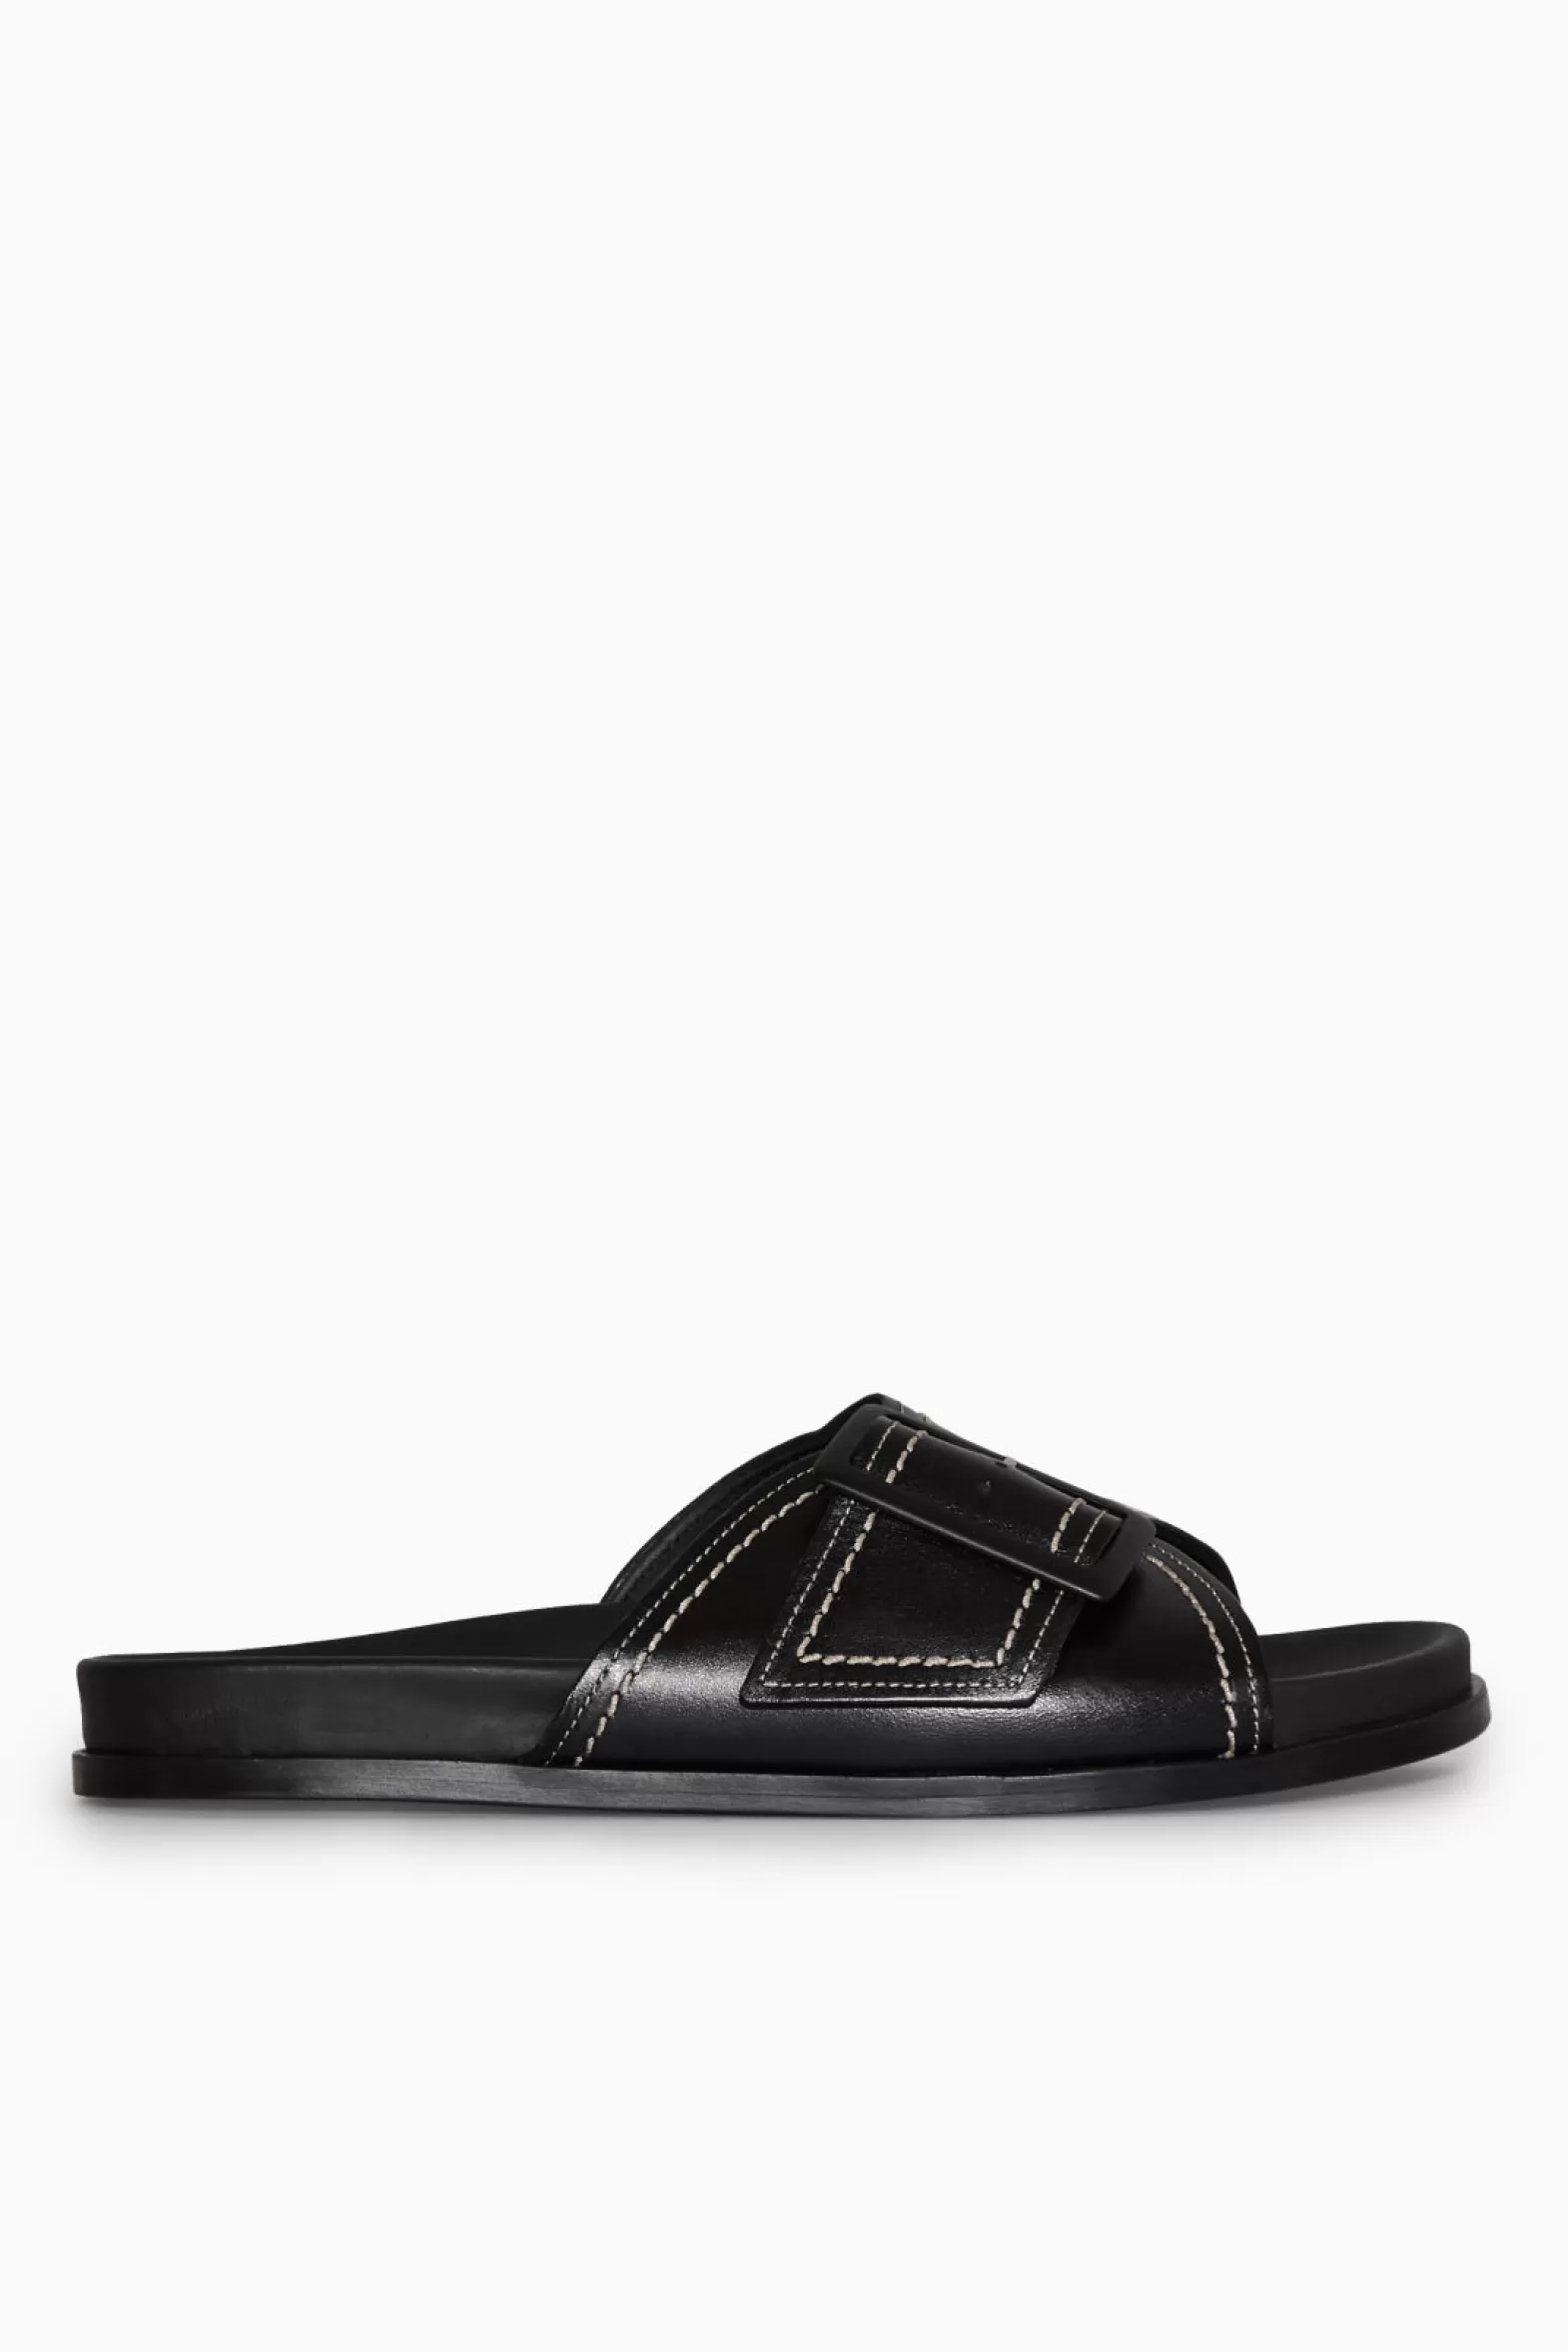 COS CONTRAST-STITCH BUCKLED LEATHER SLIDES